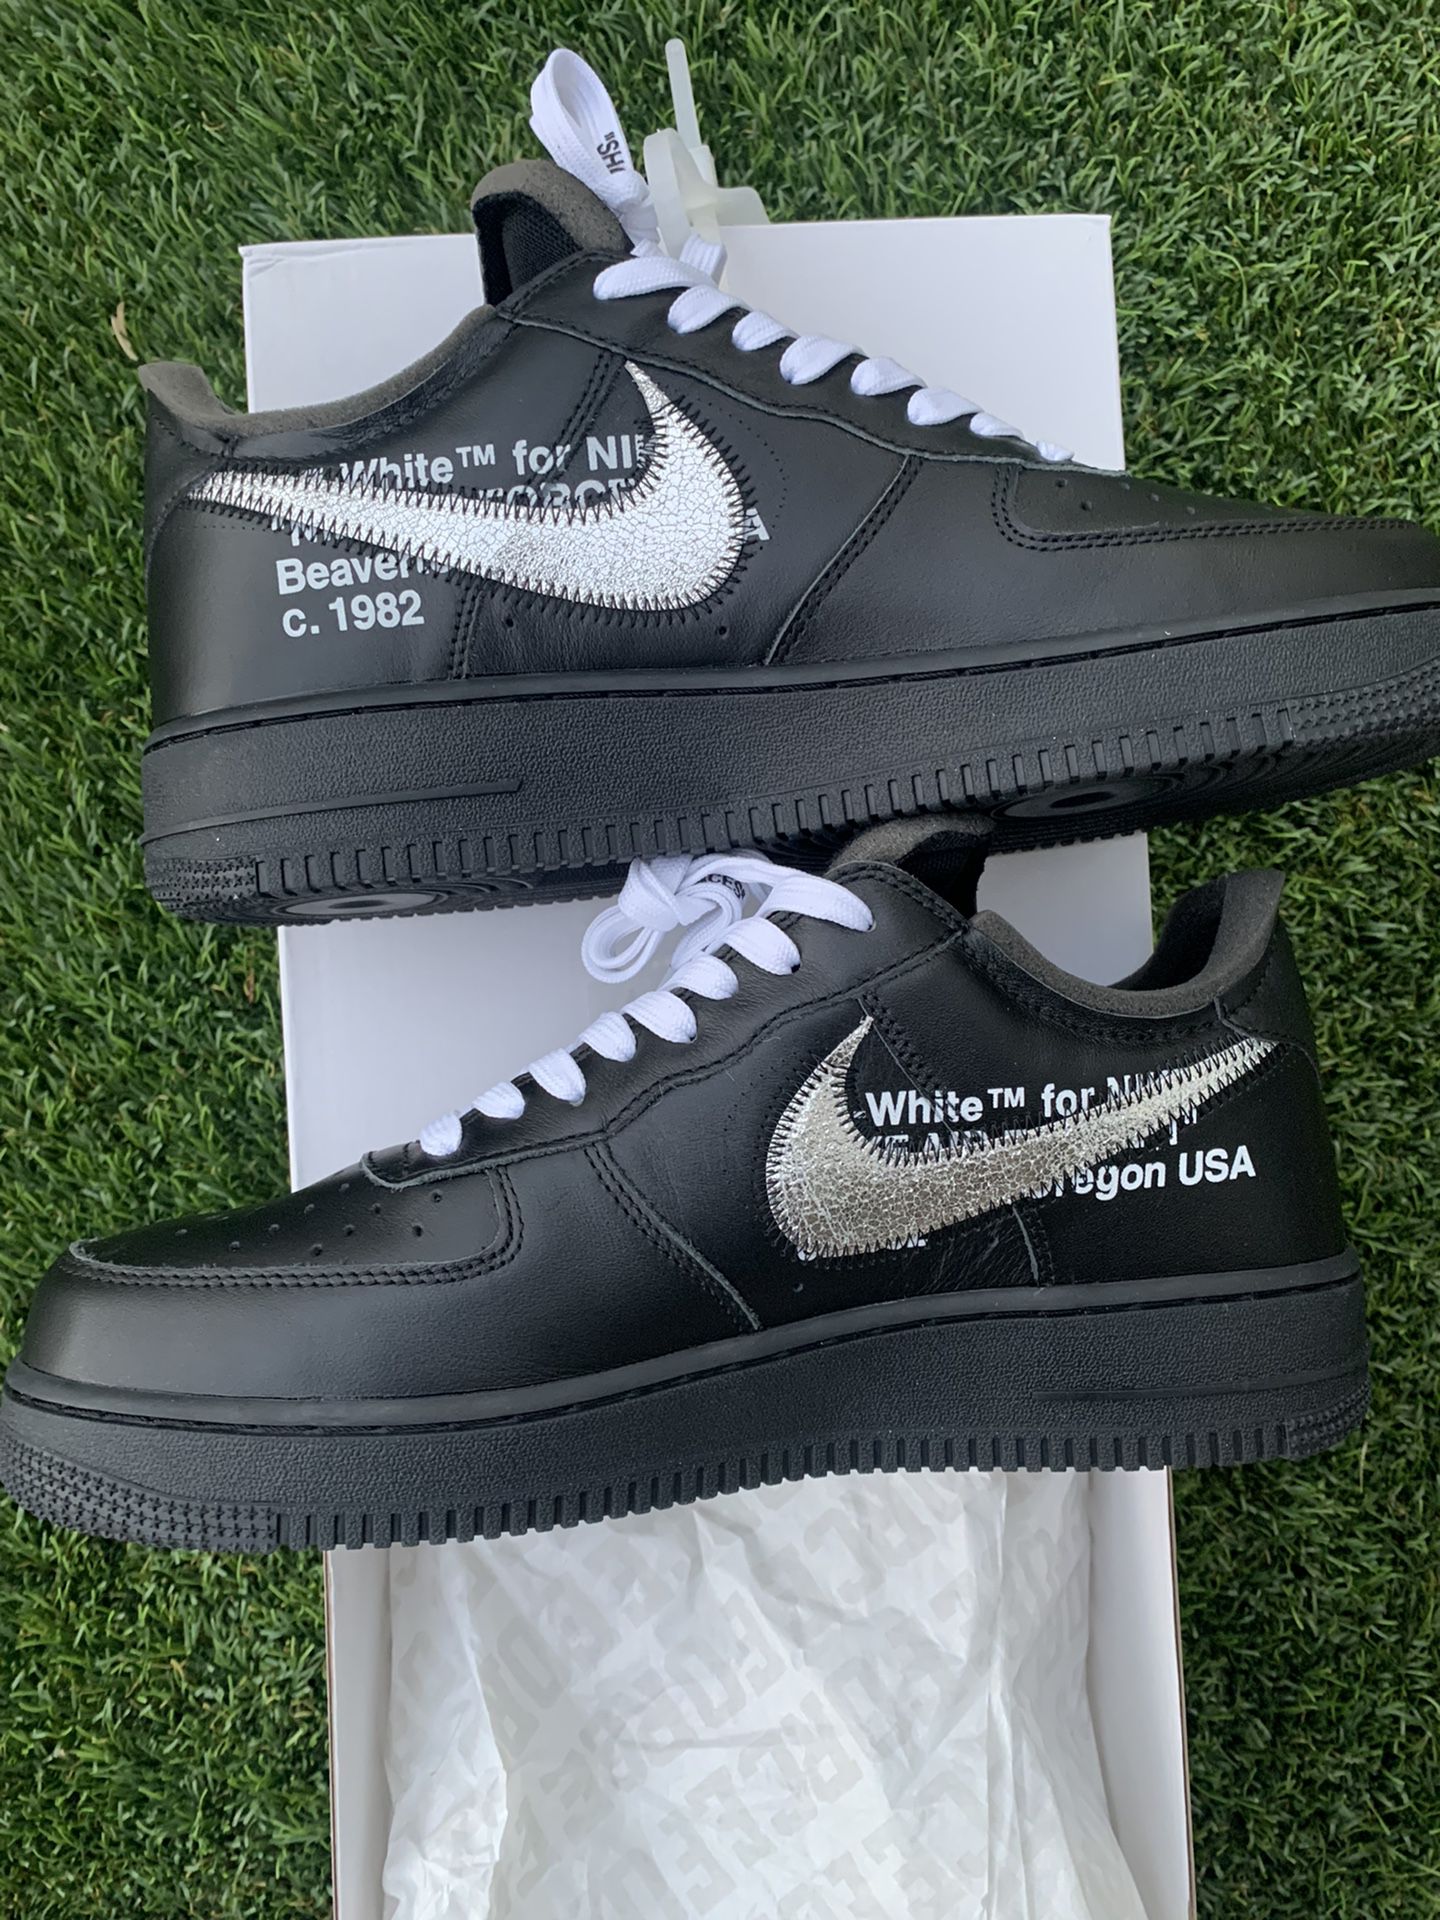 Nike Off White Air Force 1 “Moma” Size 11 Men for Sale in Bonita, CA